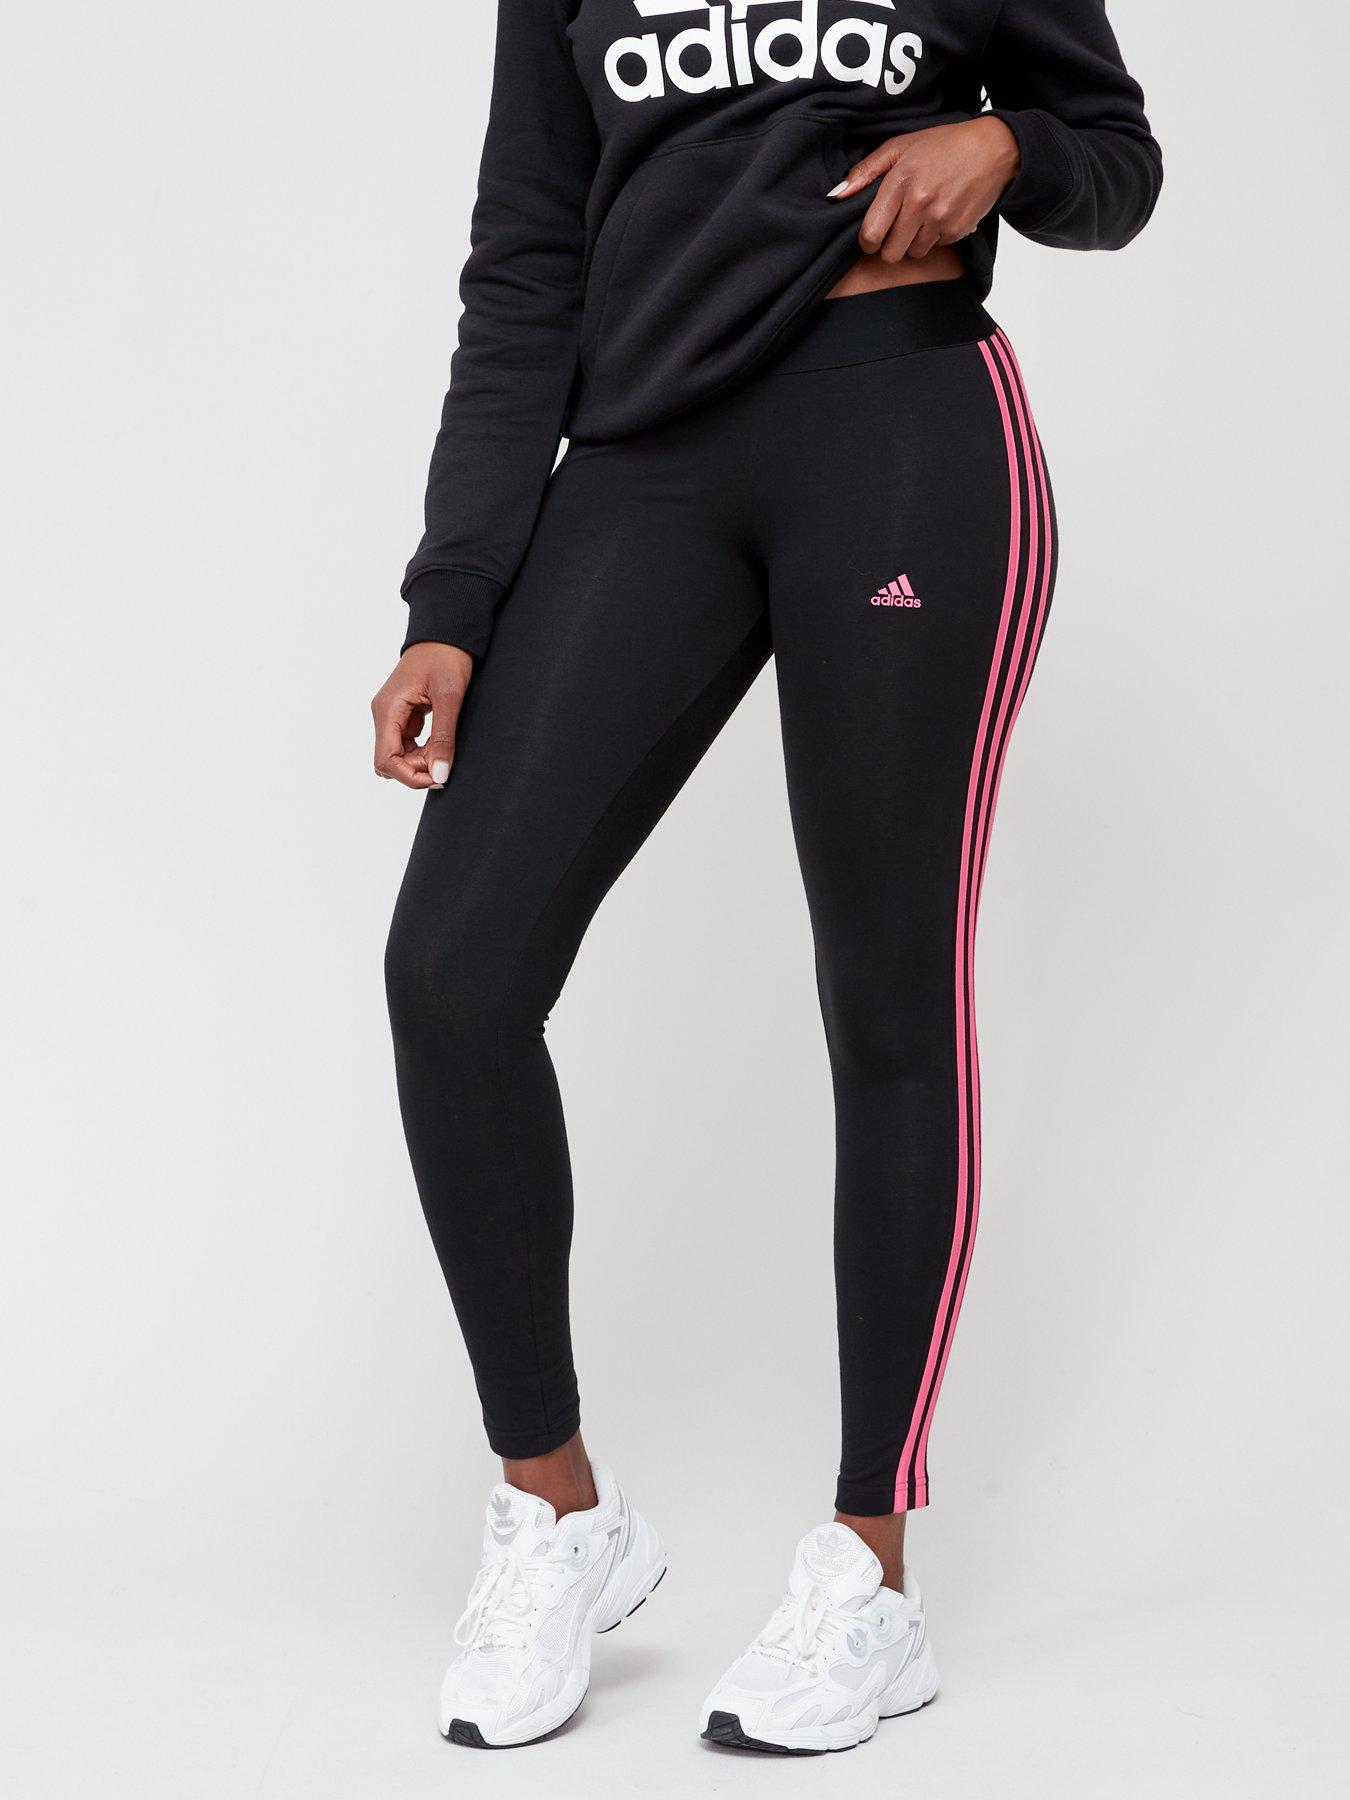 Adidas Legging Outfits-22 Ideas On How To Wear Adidas Tights  Outfits with  leggings, Adidas leggings outfit, Adidas outfit